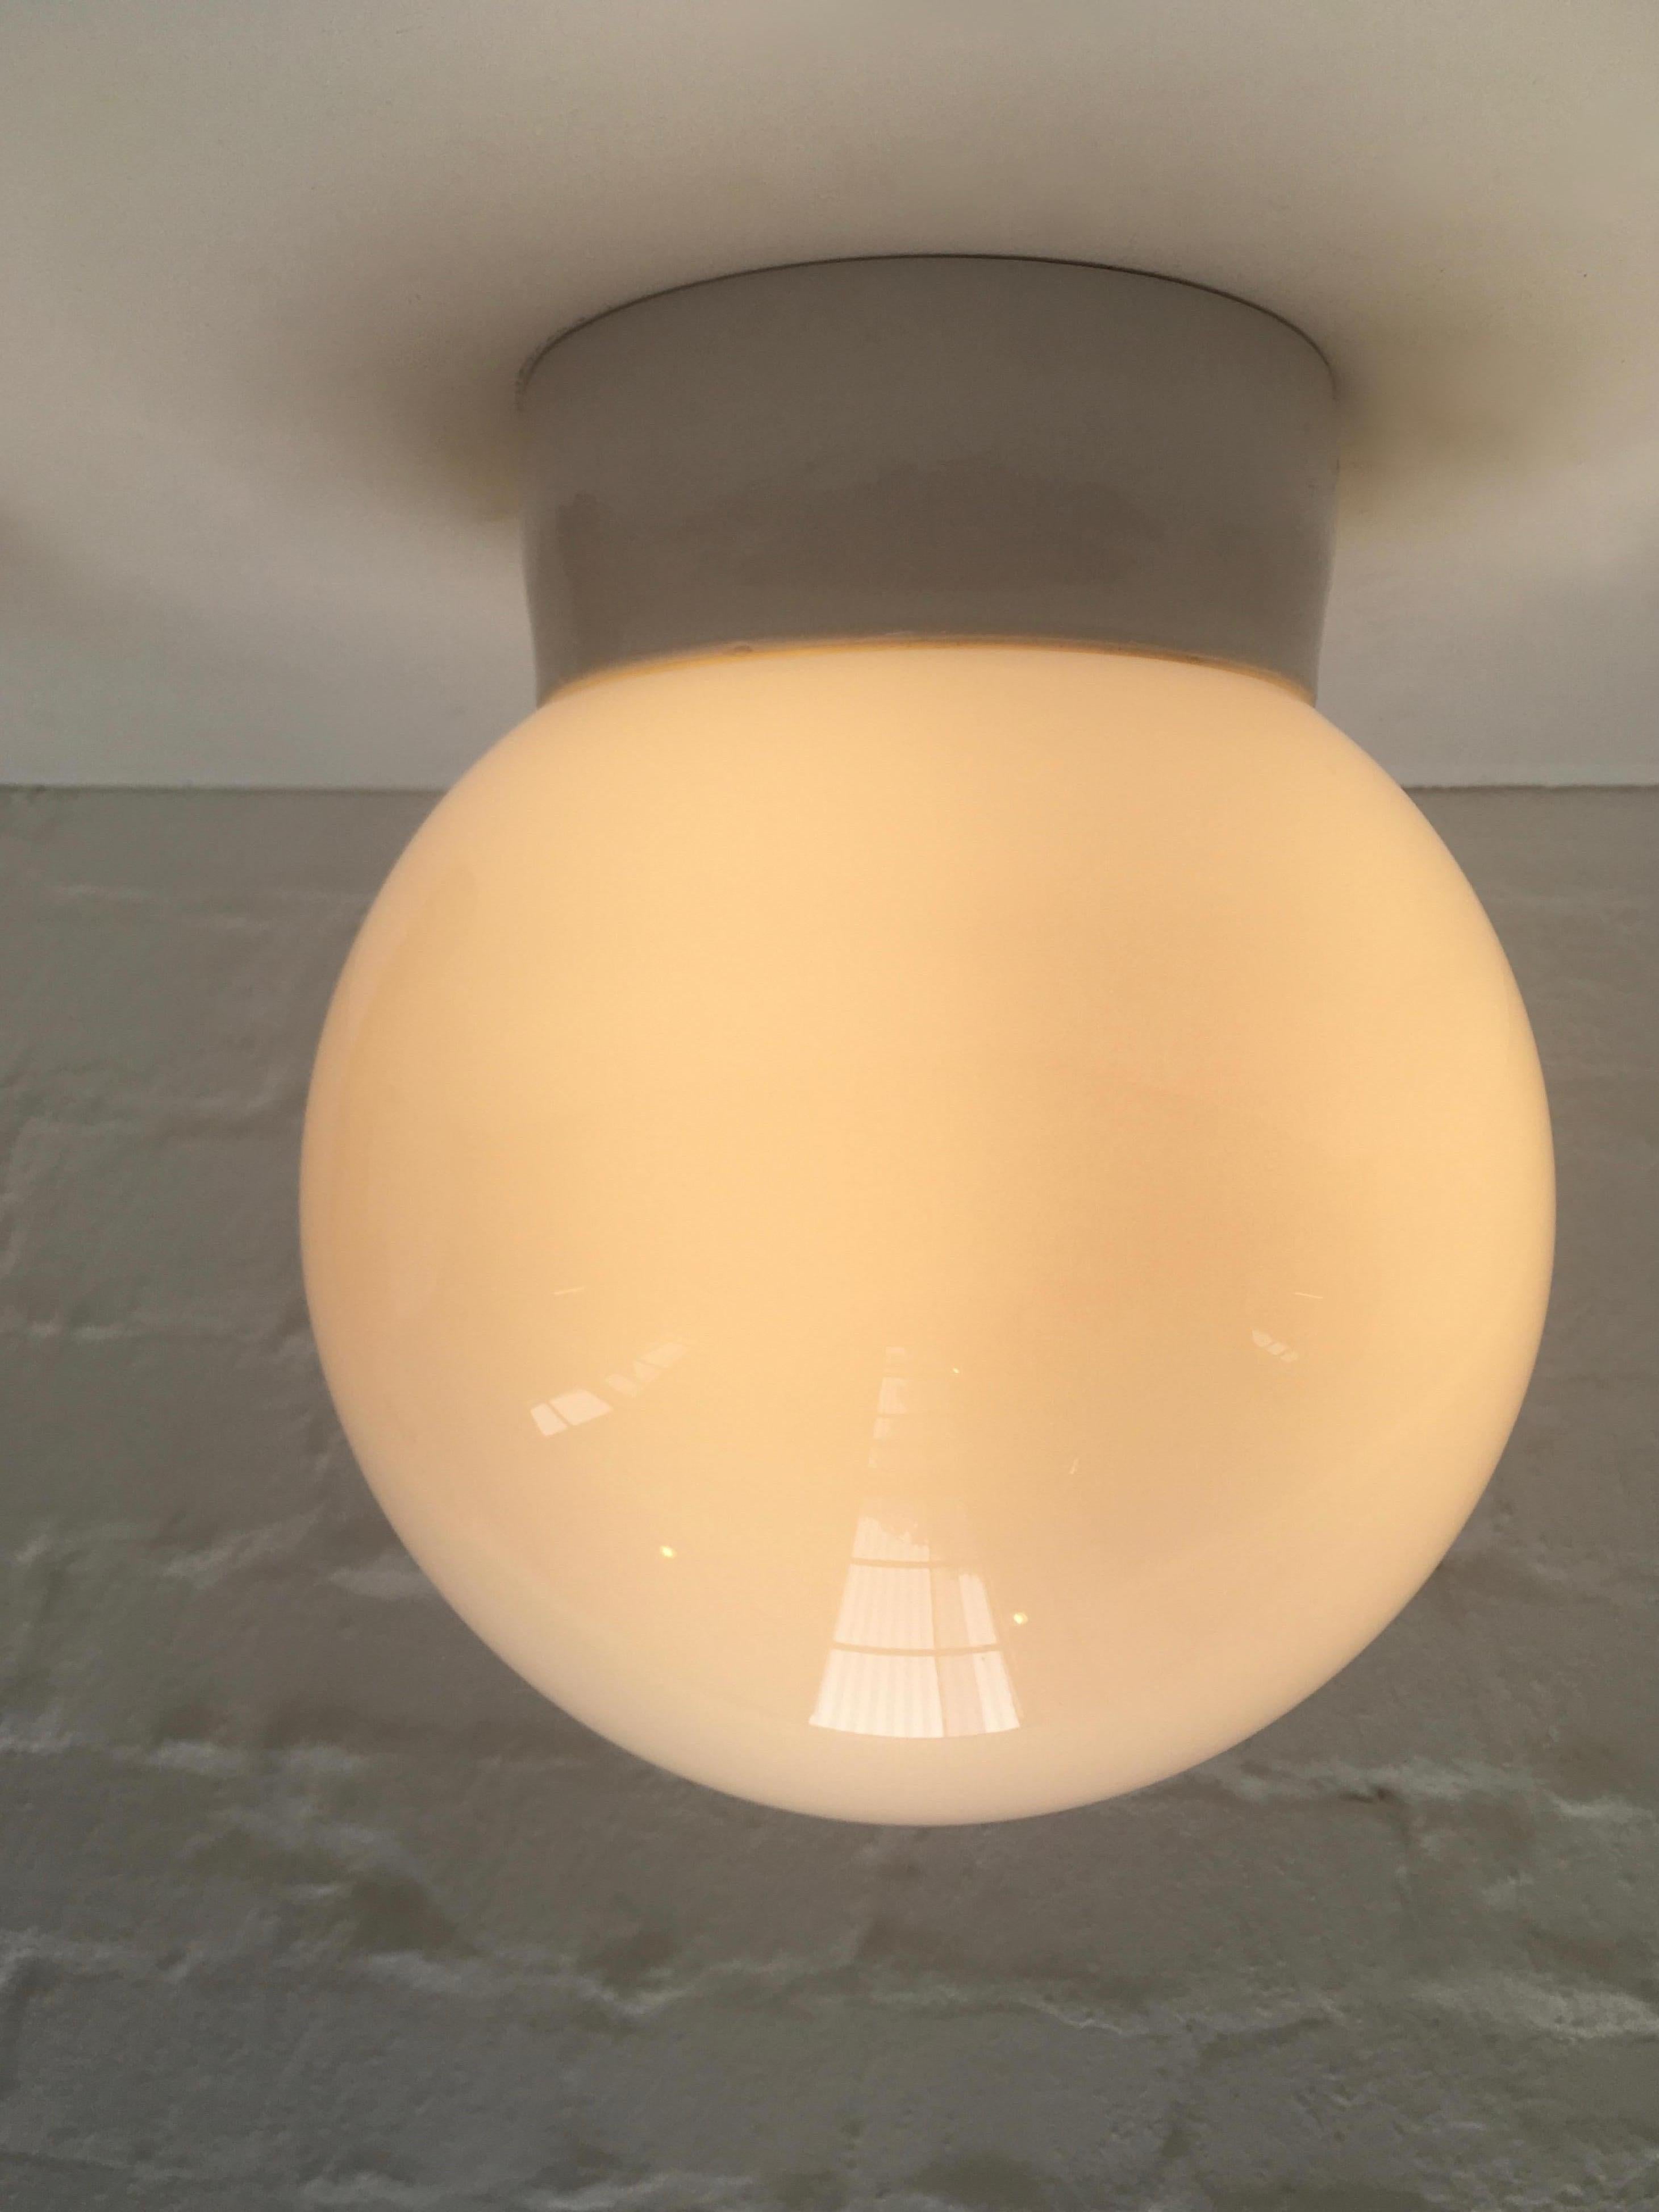 Four original large Lindner Leuchten Bauhaus ceiling or wall lights. This is a very unusual size to find in any quantity, being larger than the standard Lindner globe light. See images for scale set against a standard wine bottle. 

This simple,